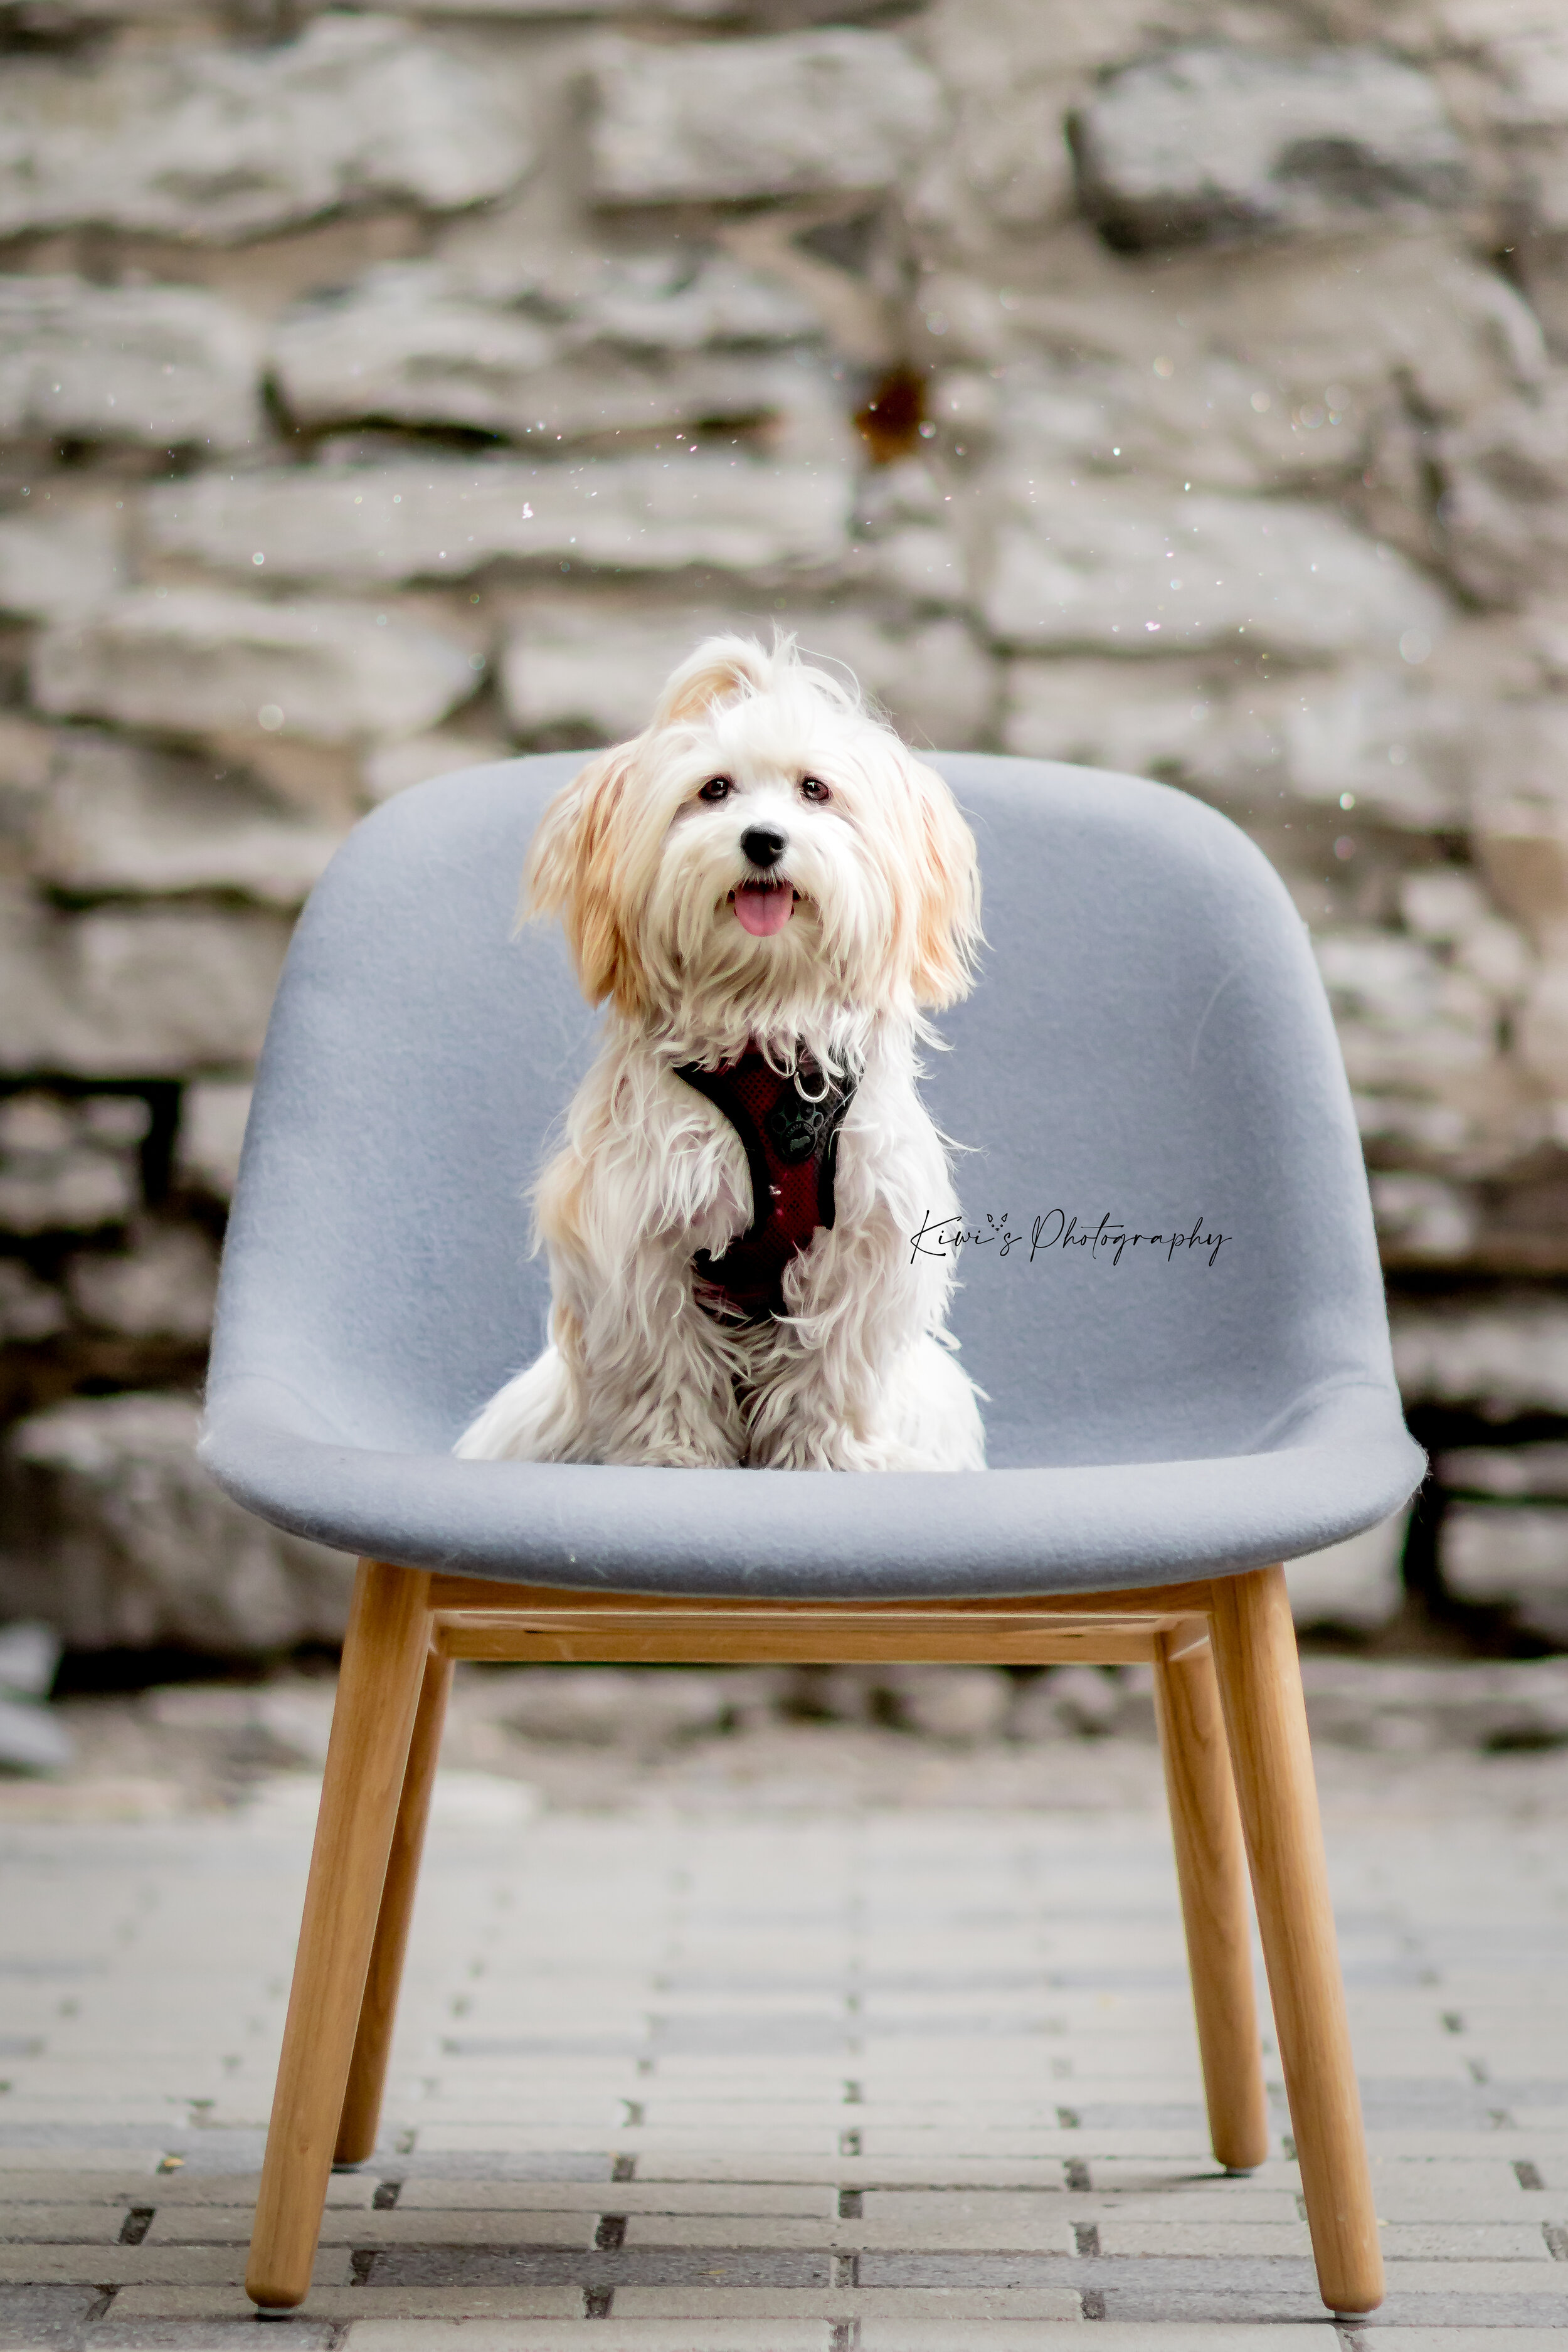 This is Mila the Havanese. She sat like a lady and stared at the camera like a true Insta-Pup!